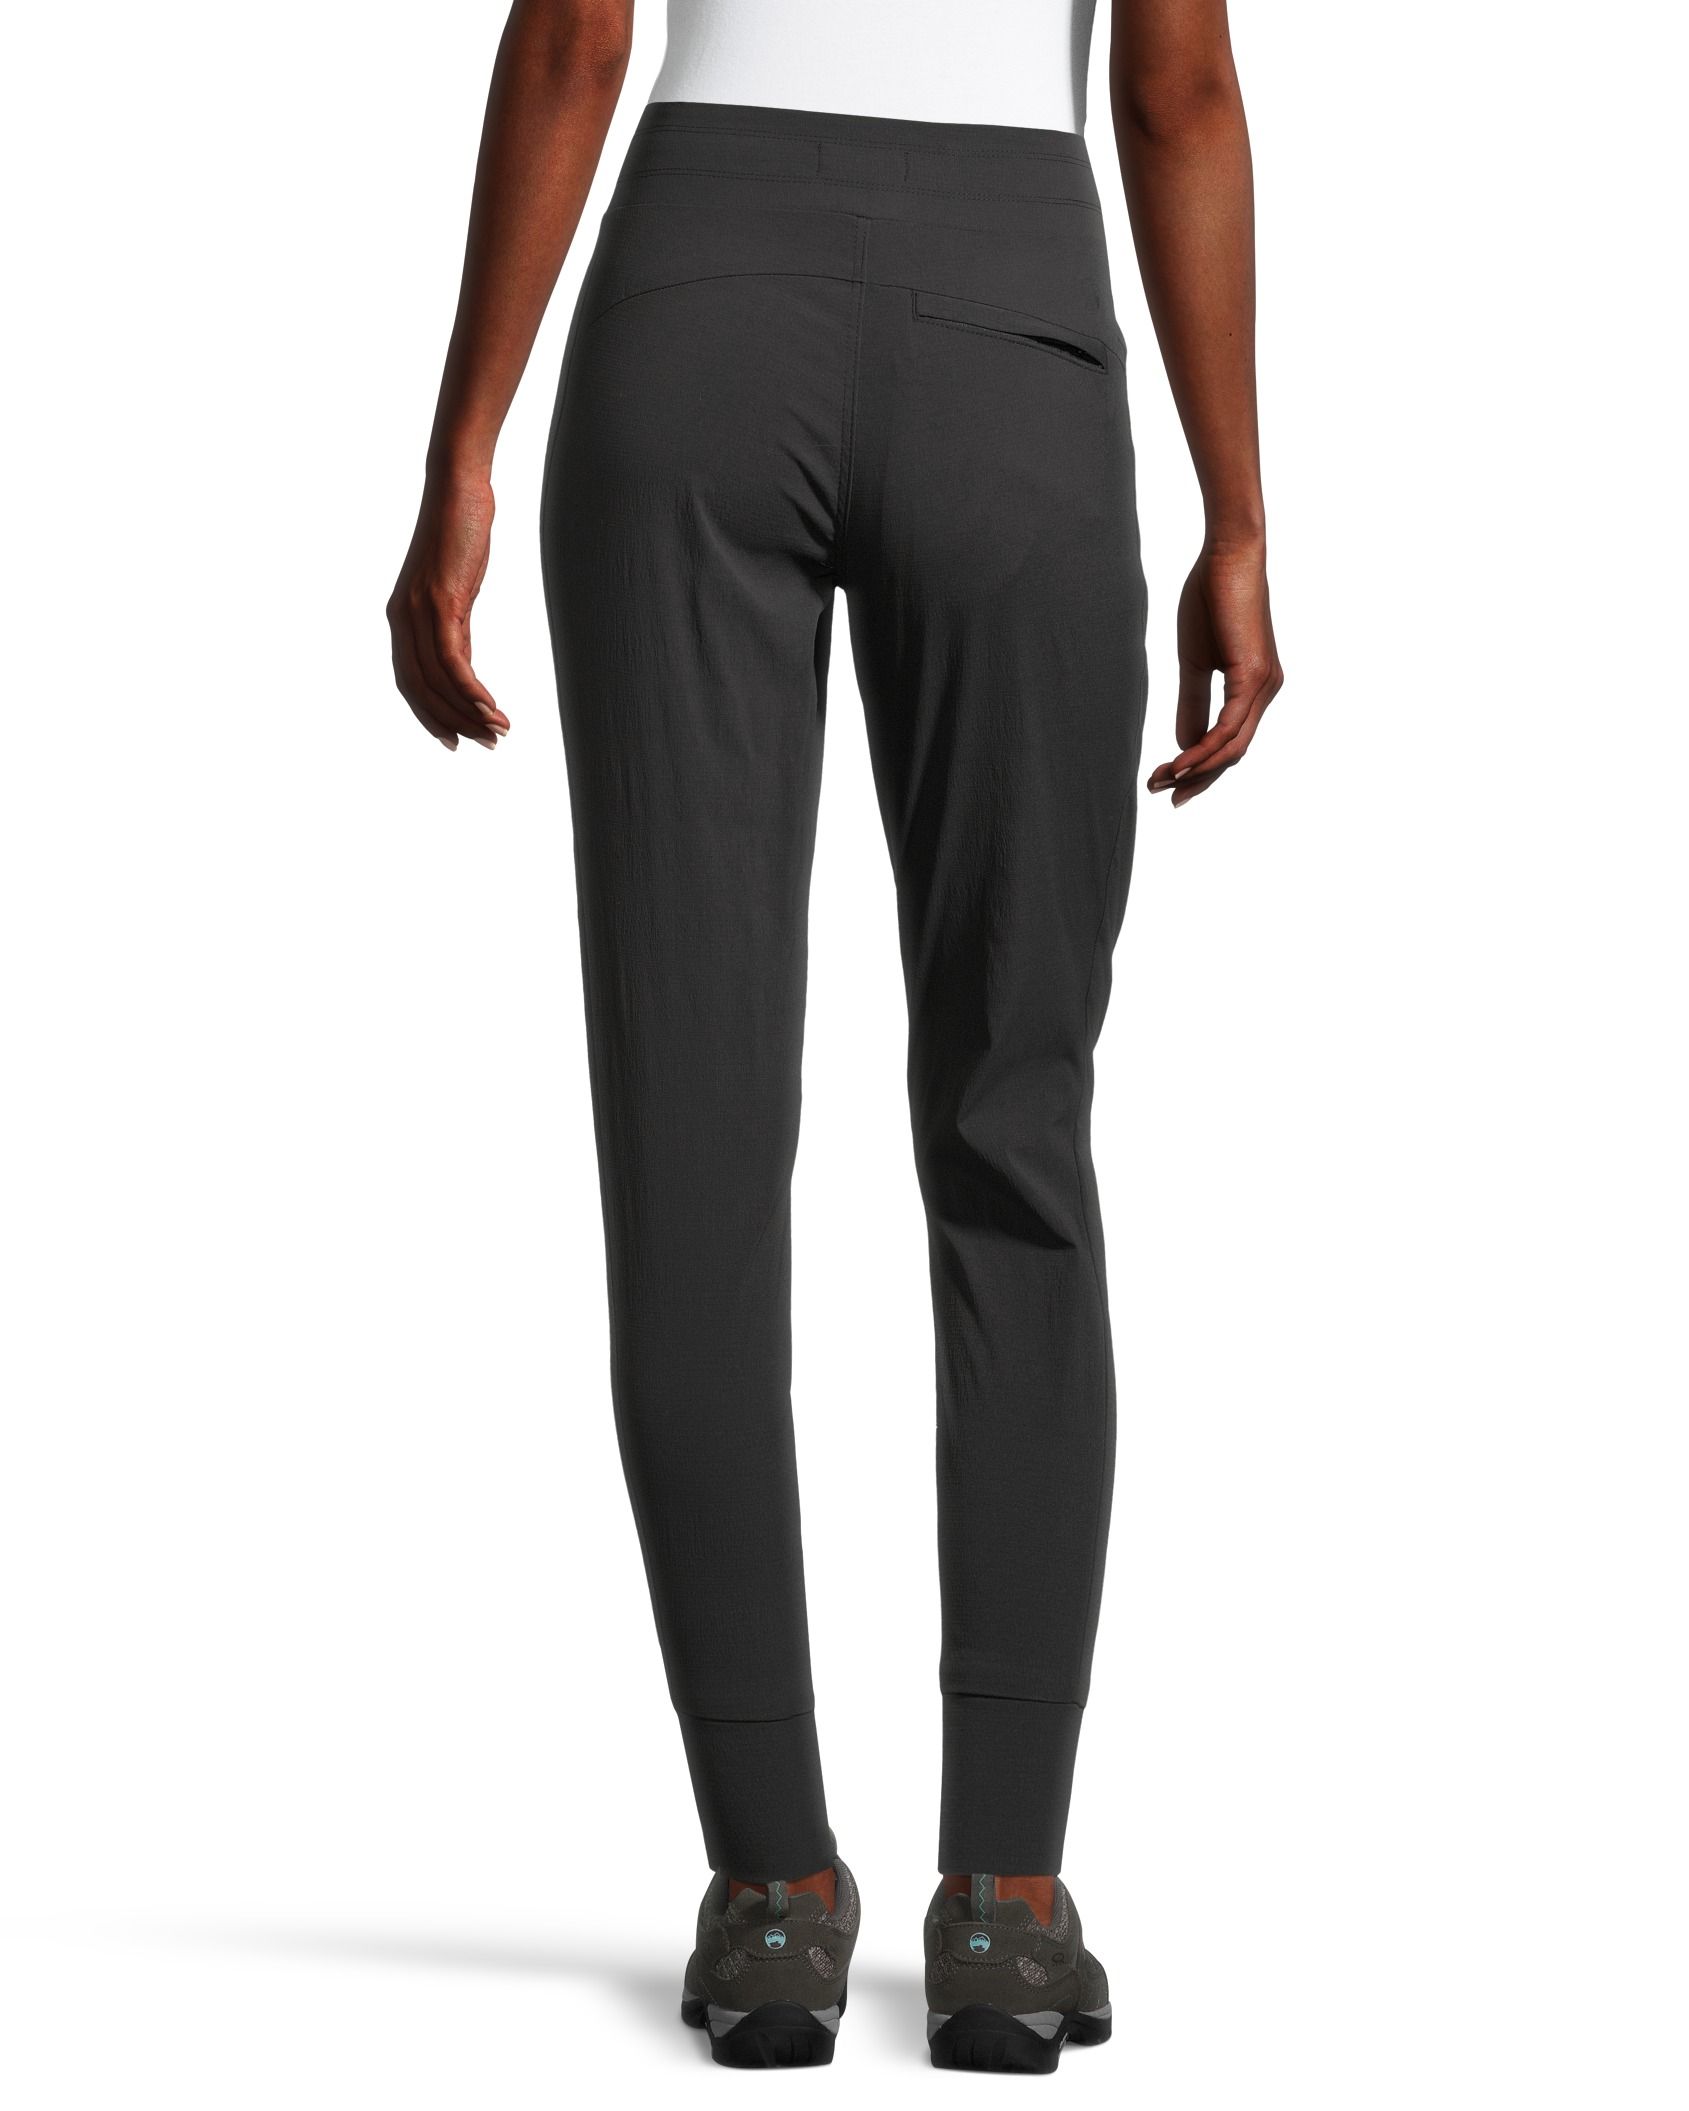 Women Joggers with Slip Pockets